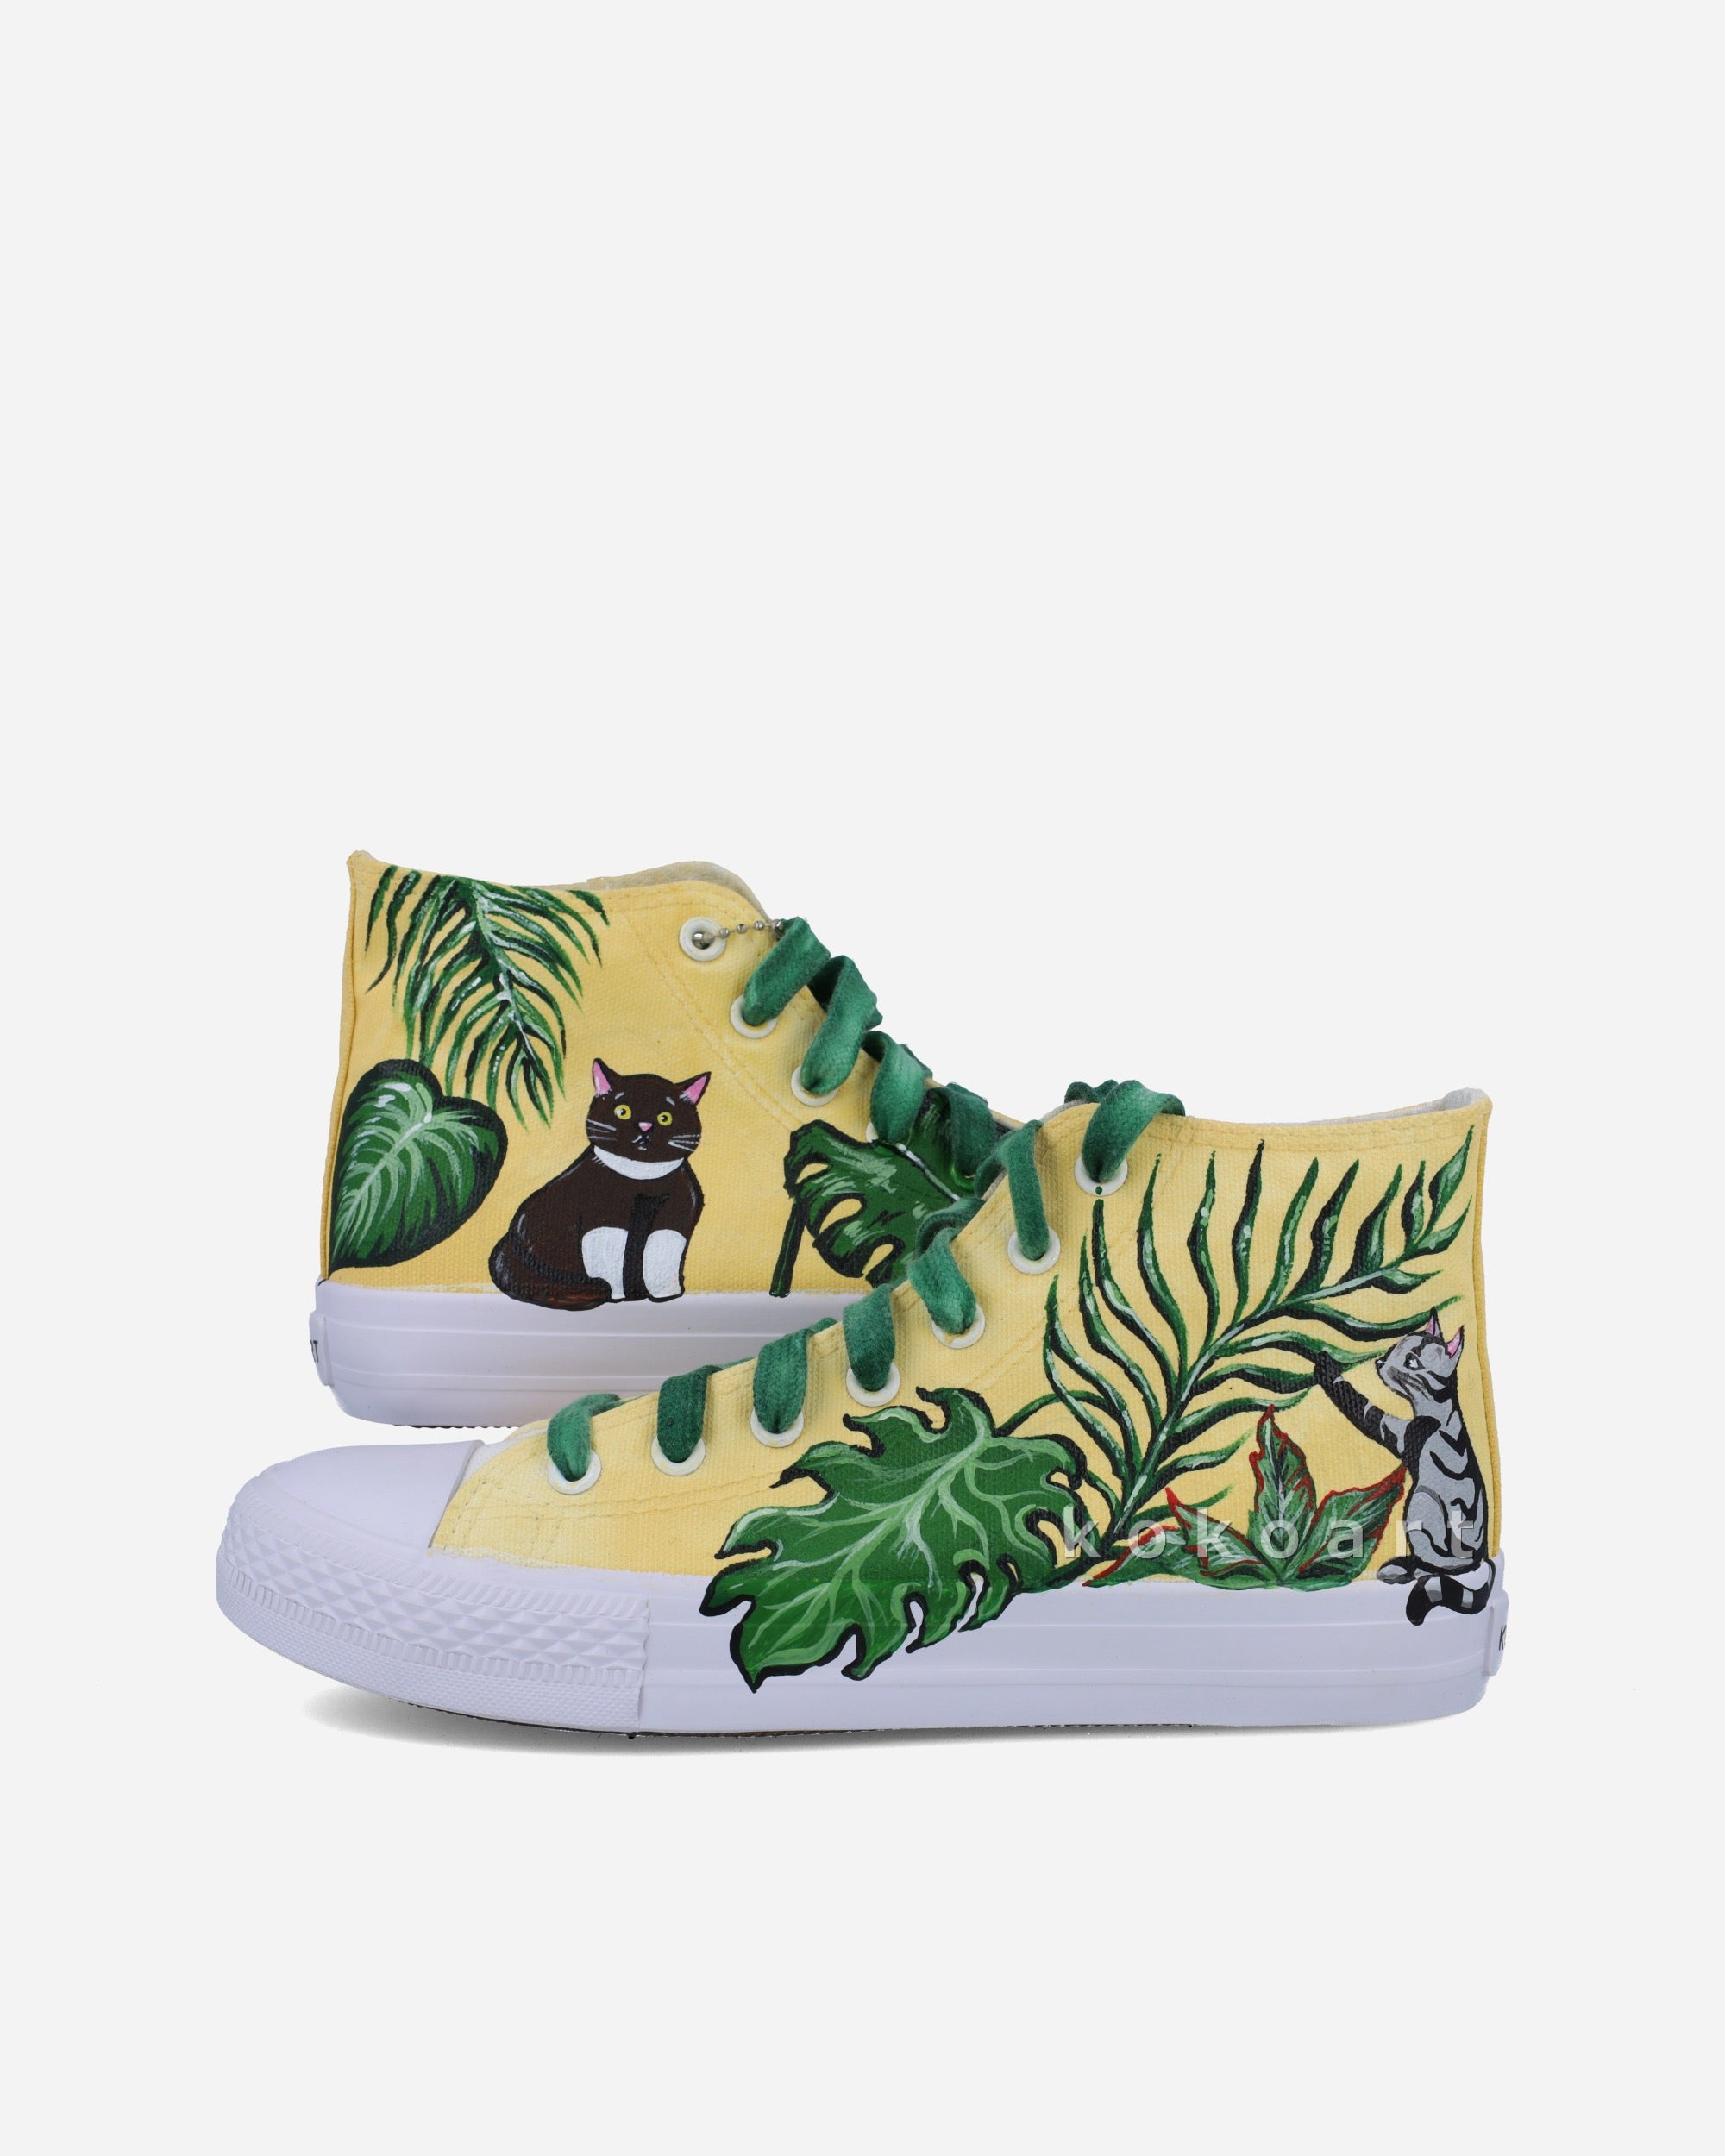 Cat Illustration Hand Painted Shoes